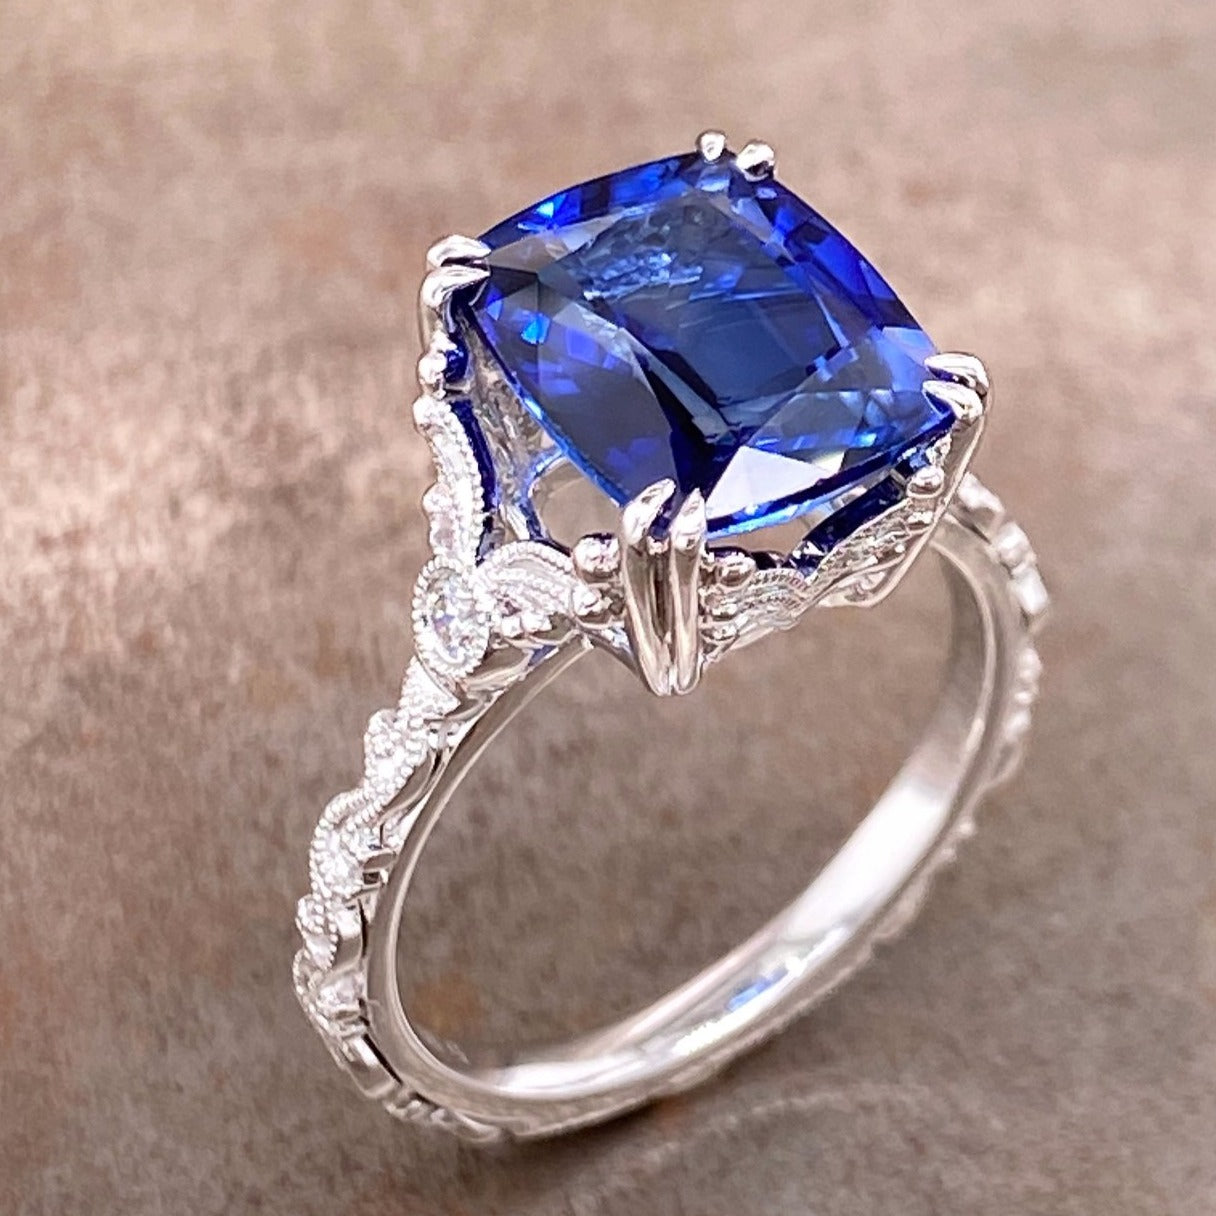 Aerial view of sapphire and 14 karat white gold ring. The ring features an emerald cut blue sapphire that is claw prong set with two claws at every corner. The shank features an Art Deco design with migraine on every border and a round diamond set on the shoulder of the shank.